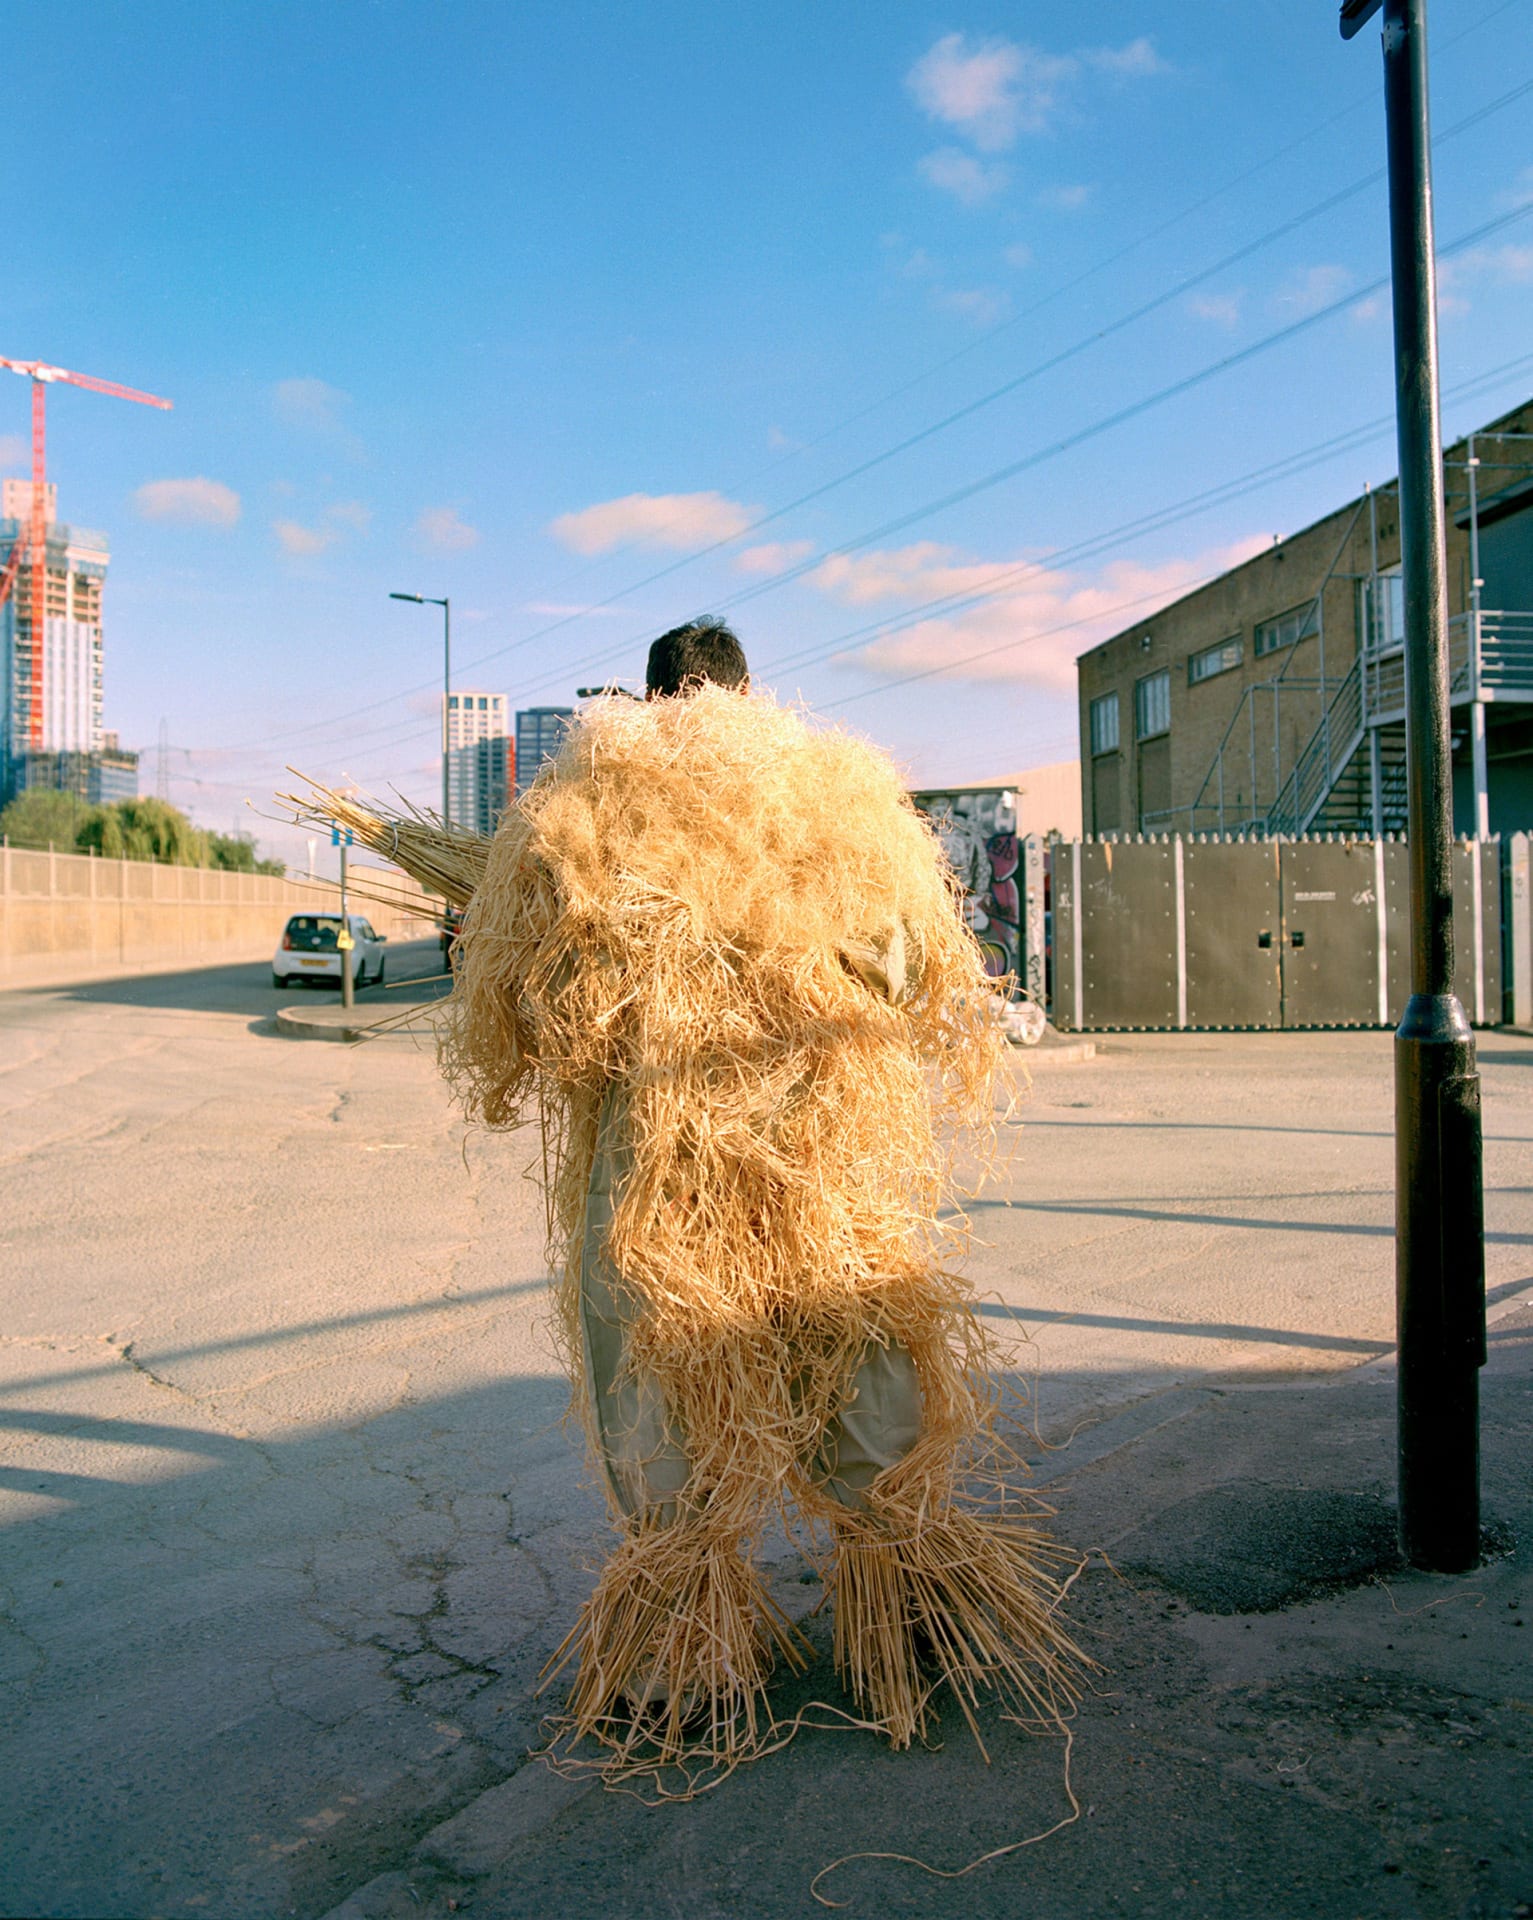 A lone figure of straw and masquerade standing in an urban landscape